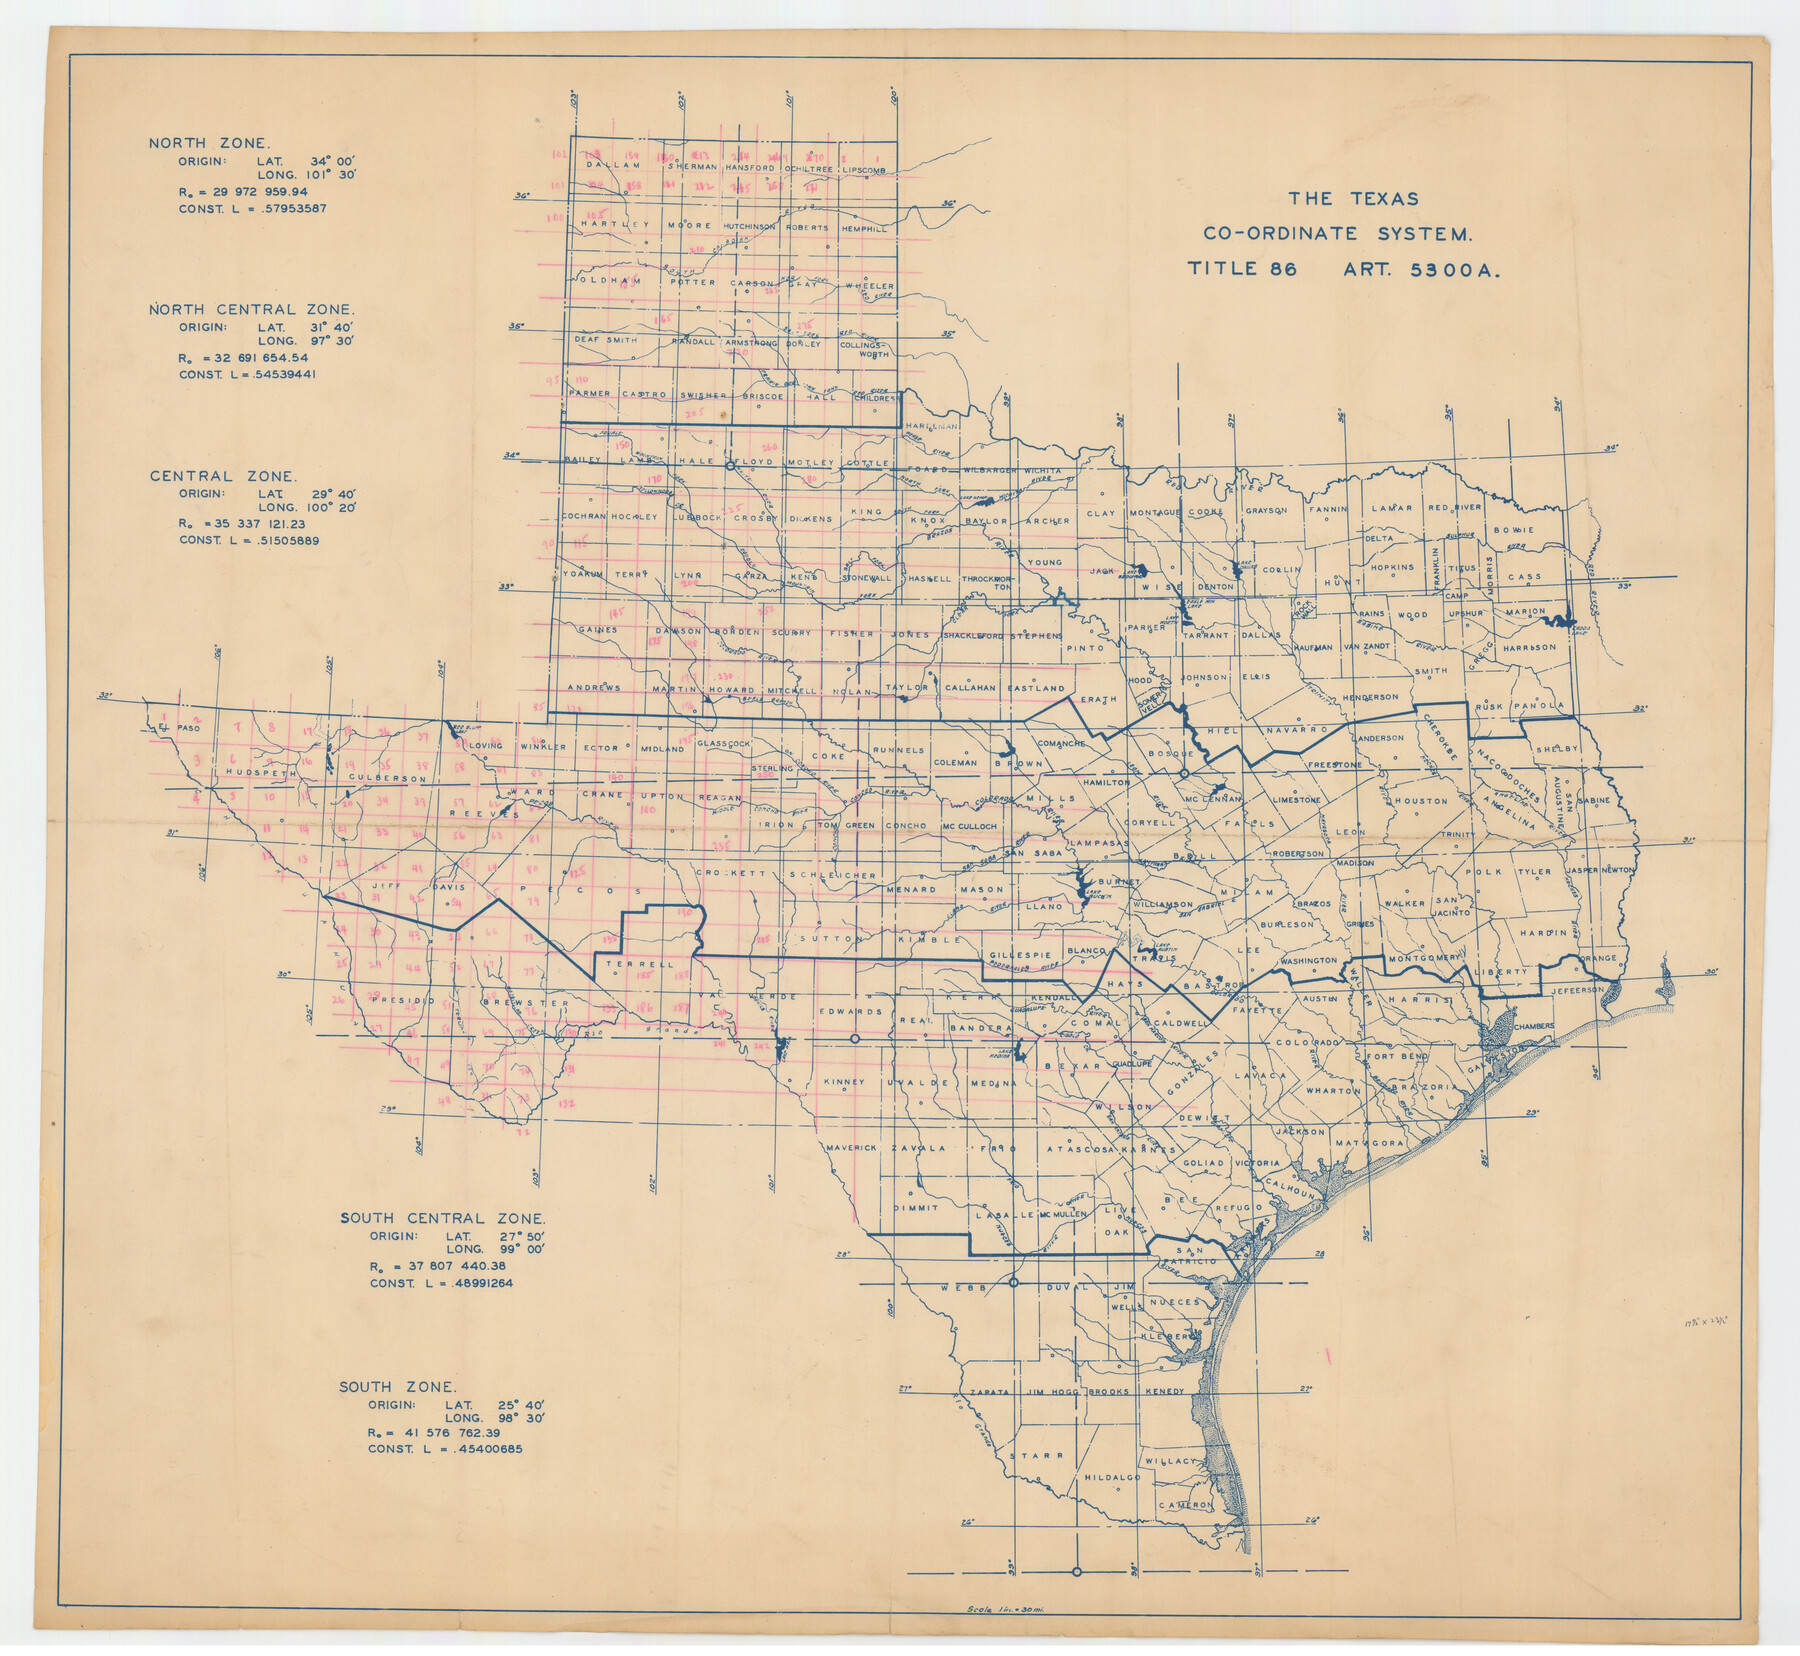 92824, The Texas Co-Ordinate System, Title 86 Article 5300A., Twichell Survey Records